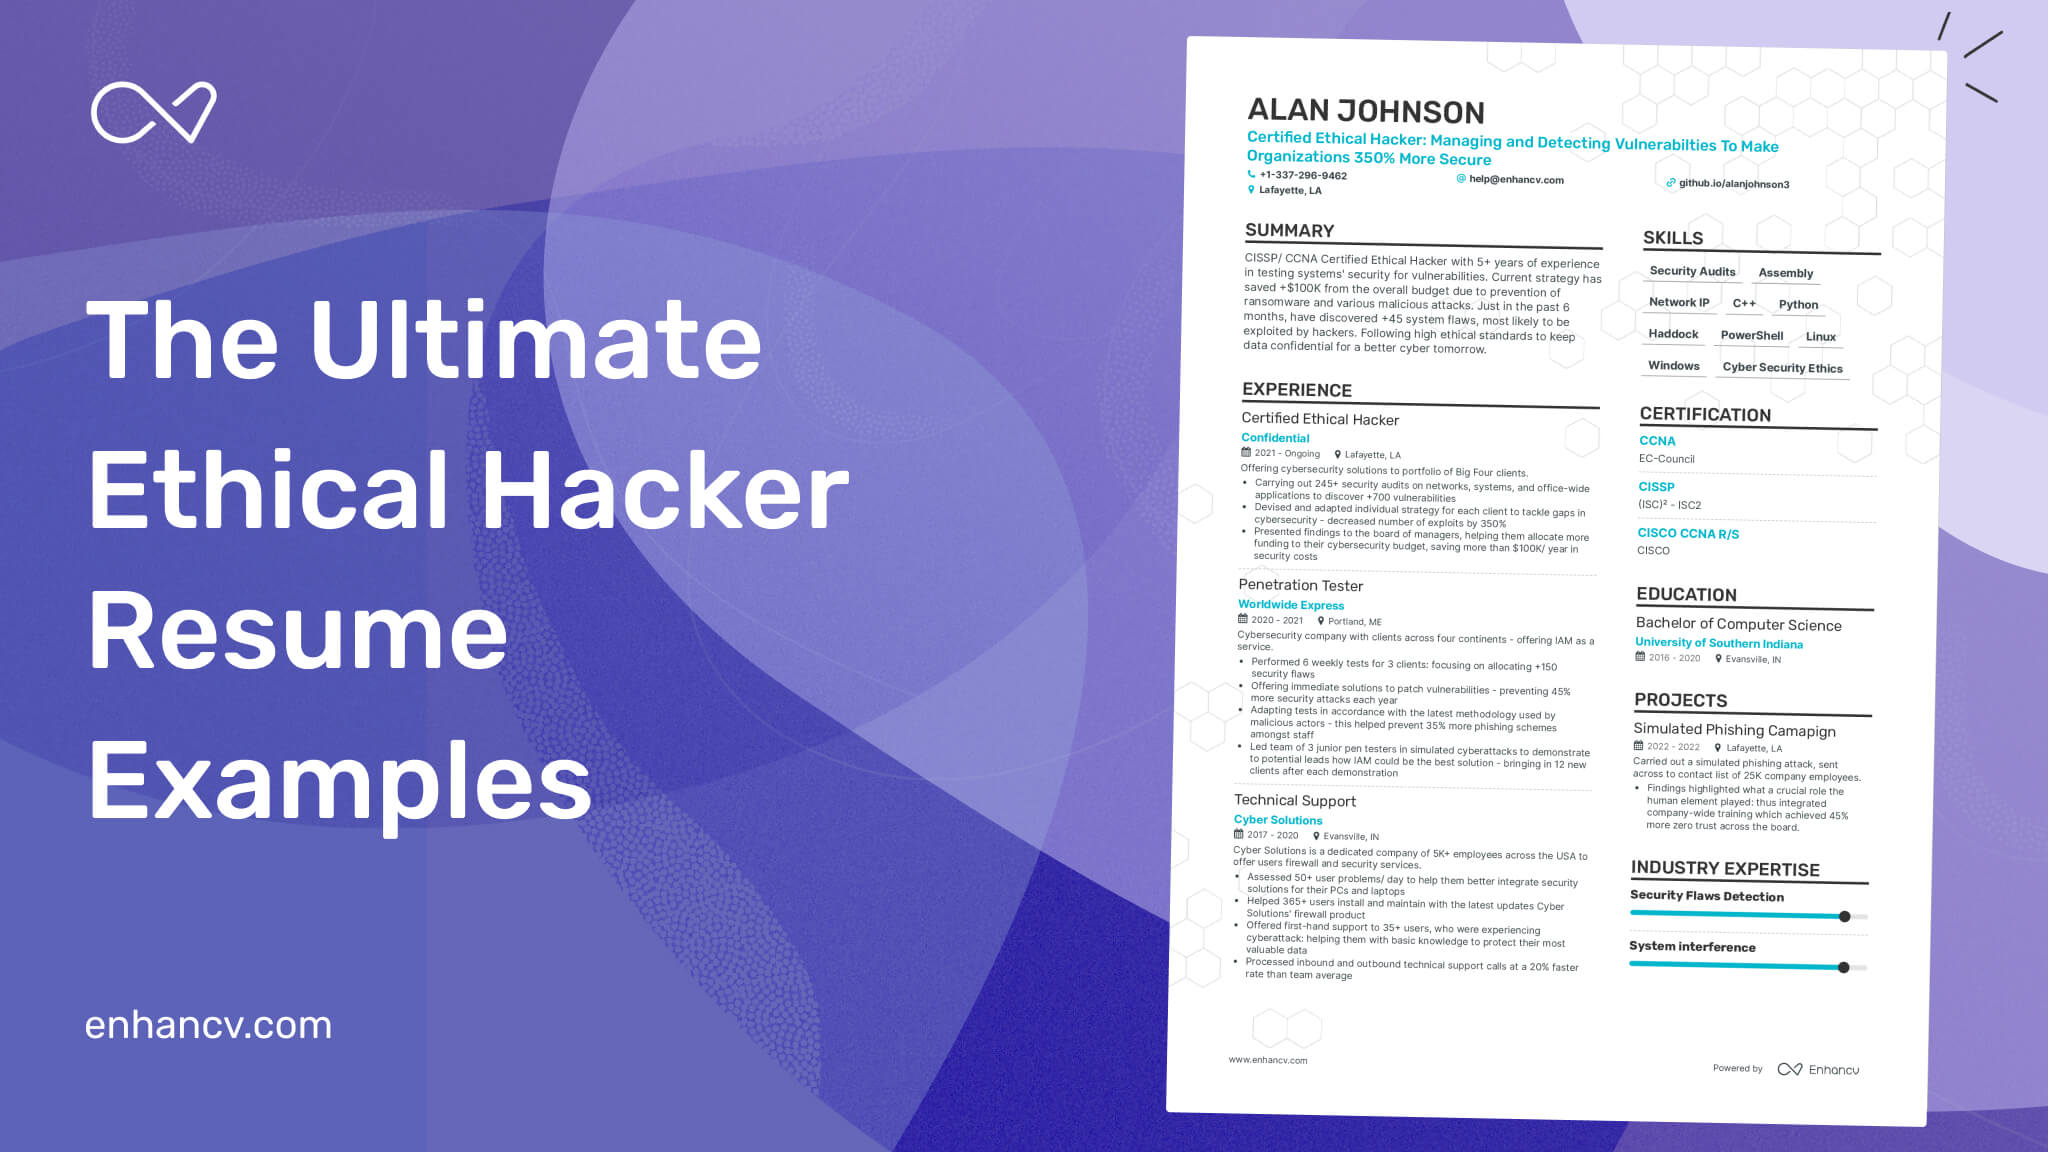 Top 5 Best Hacking Simulator for Every Aspiring Hackers to Practice Their  Hacking Skills